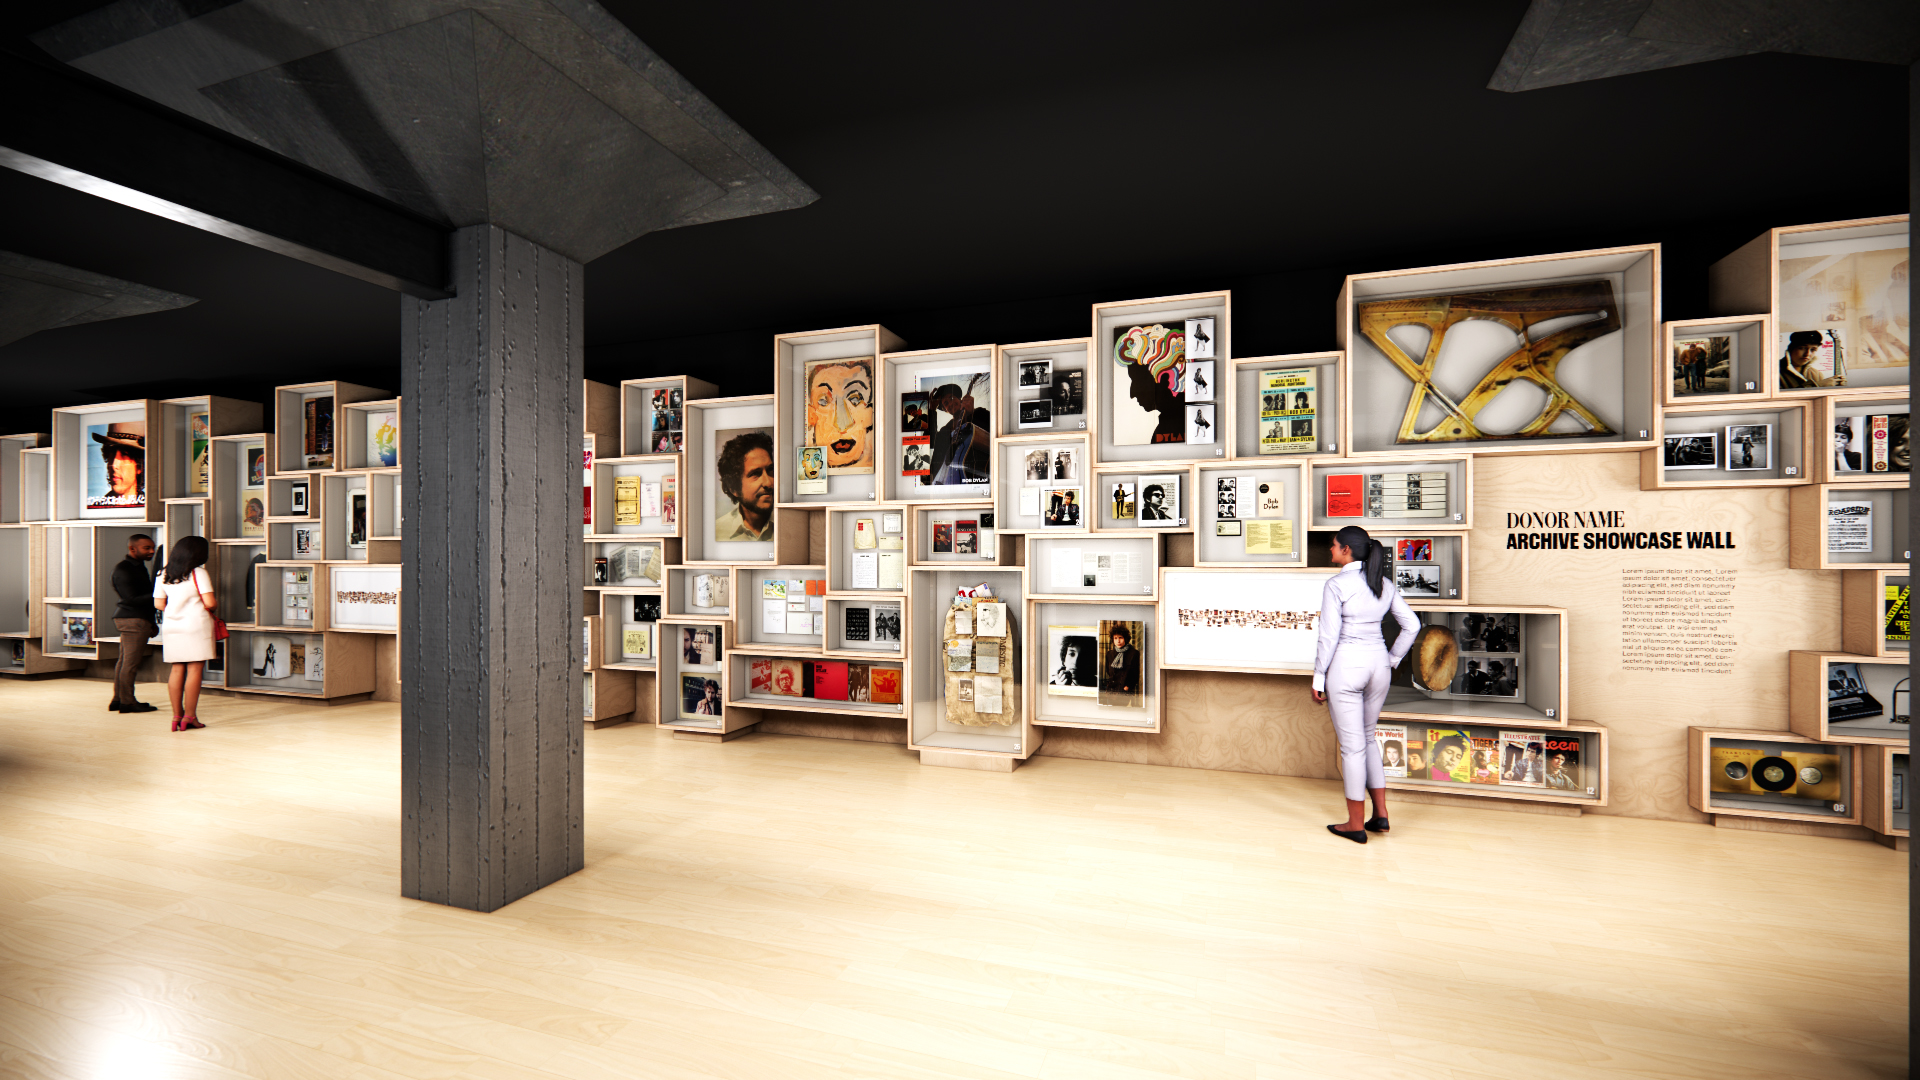 BDC-Interior-Archive-Wall-Rendering-Courtesy-of-Olson-Kundig